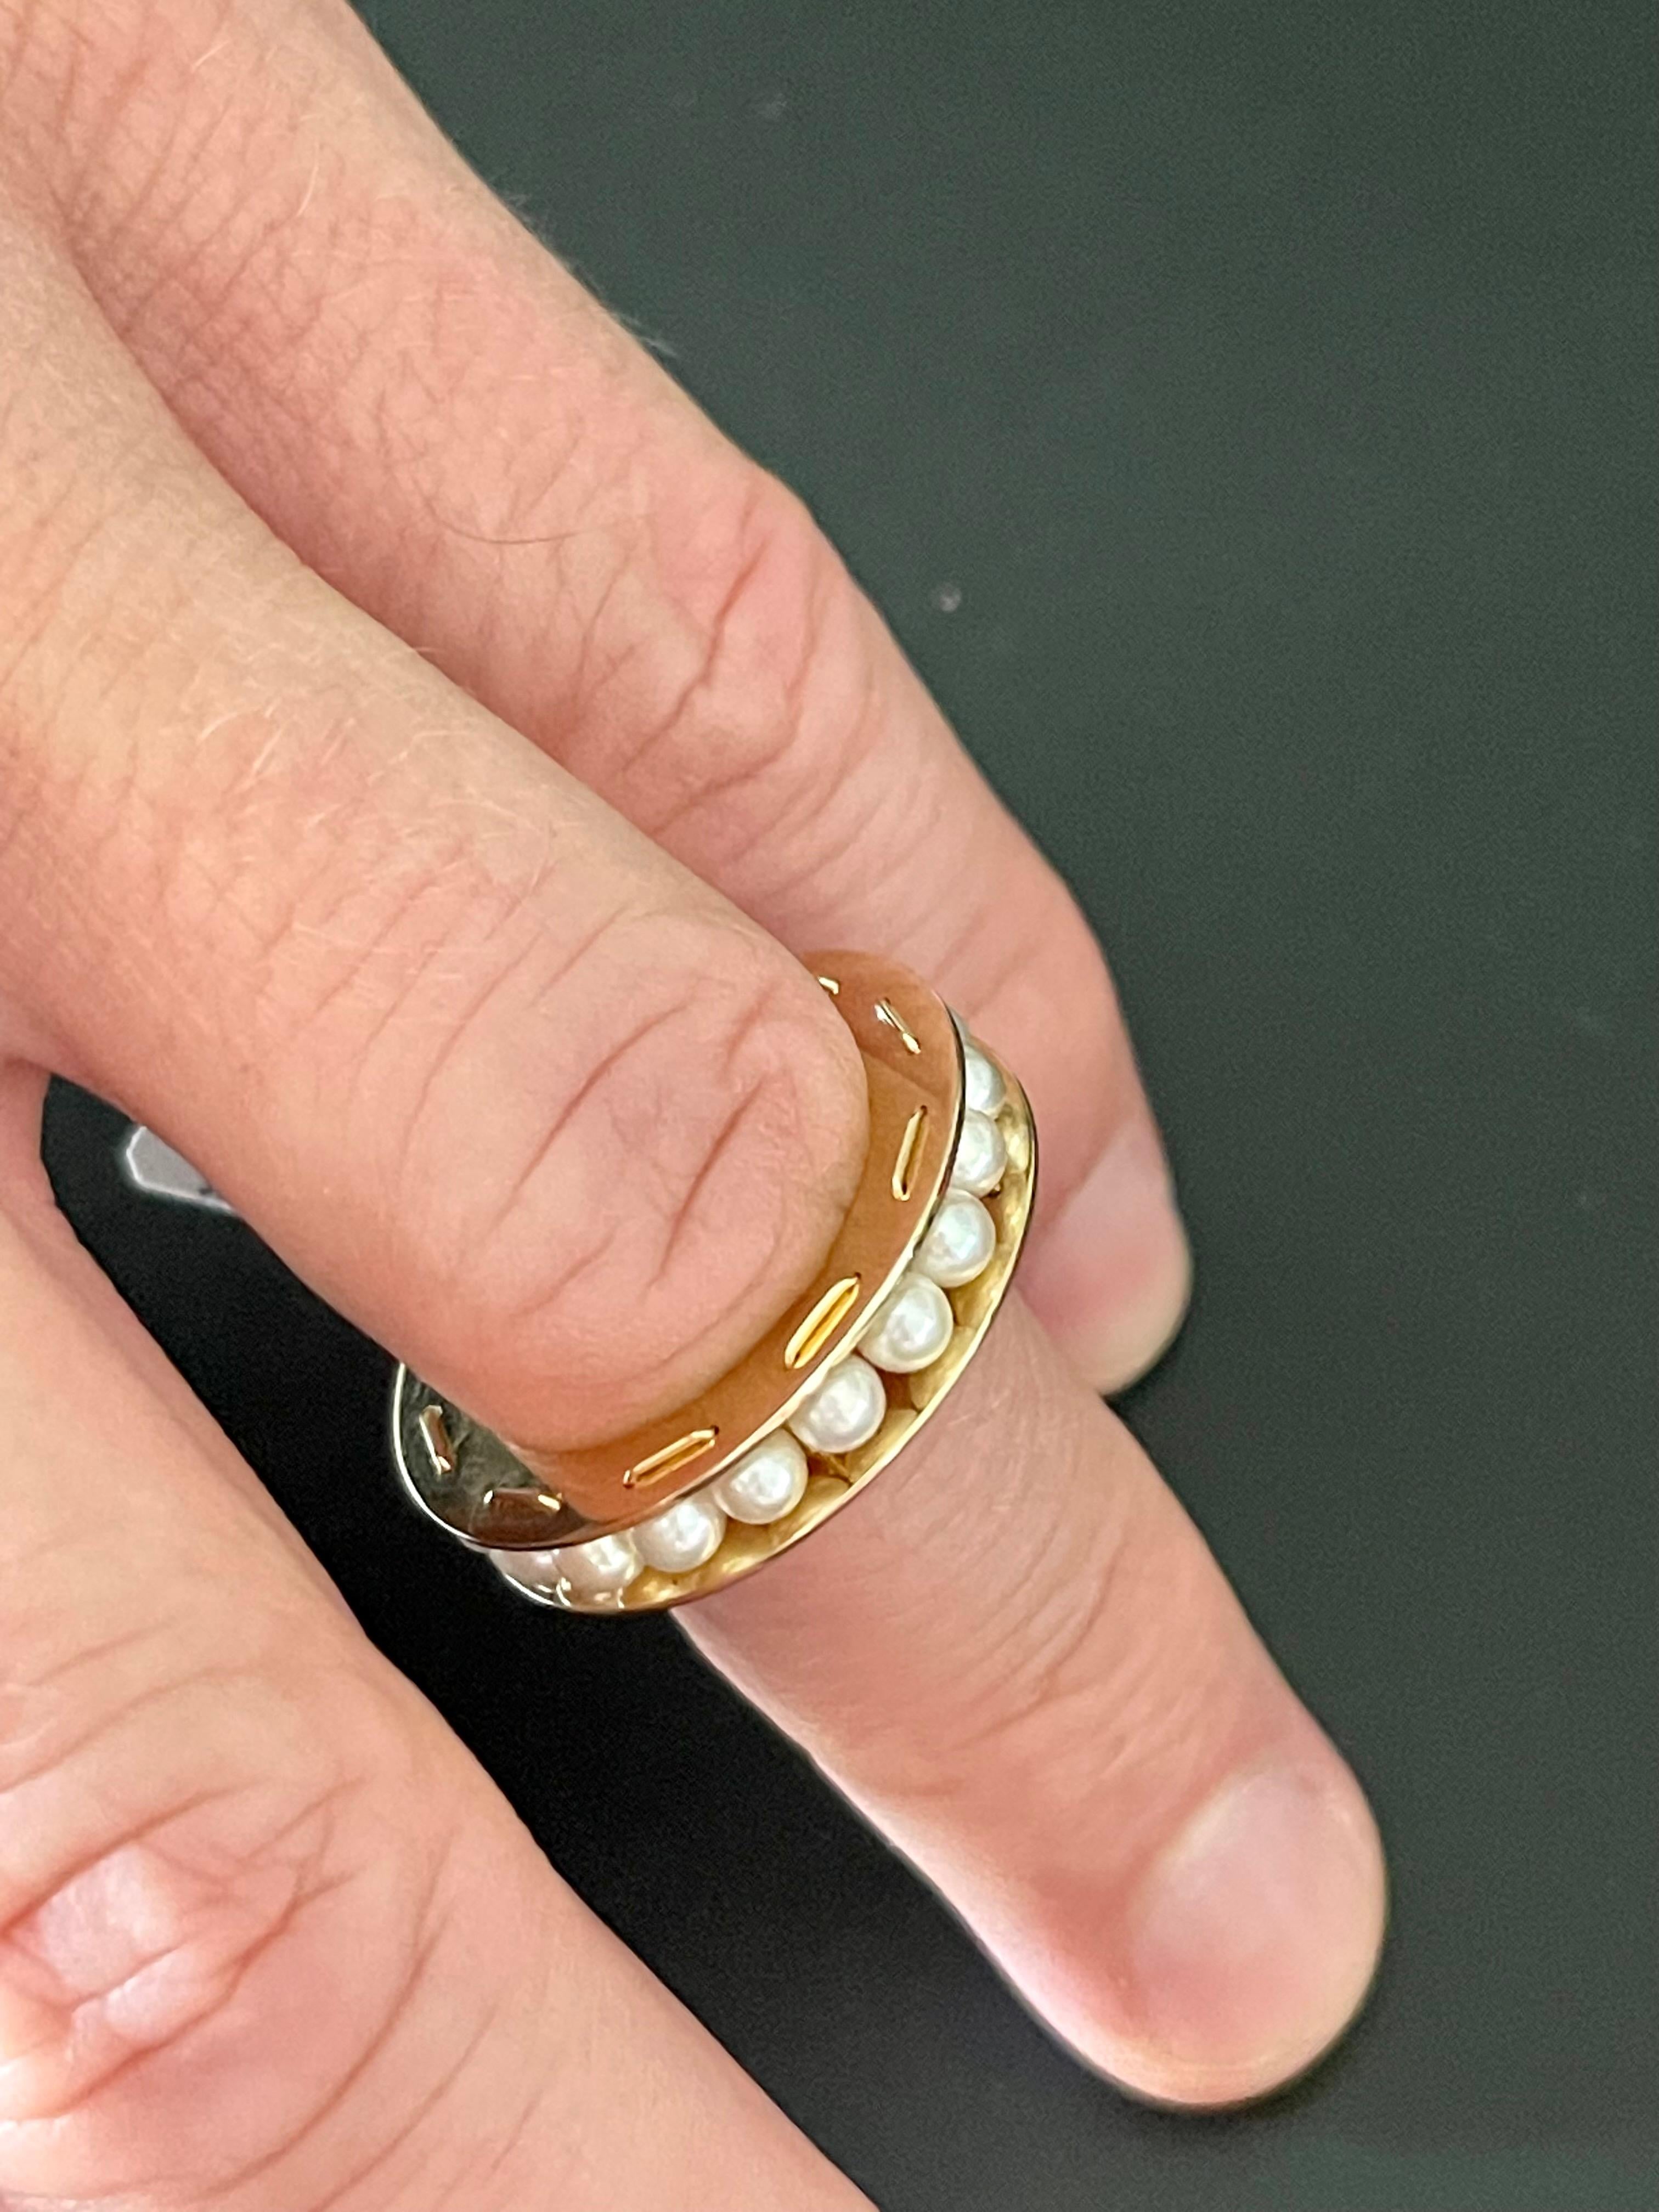 Unusual  18 K yellow Gold Eternity Ring feautruing white cultured Pearls in a channel setting.
The ring is size 55 ( US size 7 1/2 ) 
Masterfully handcrafted piece! Authenticity and money back is guaranteed.
For any enquires, please contact the